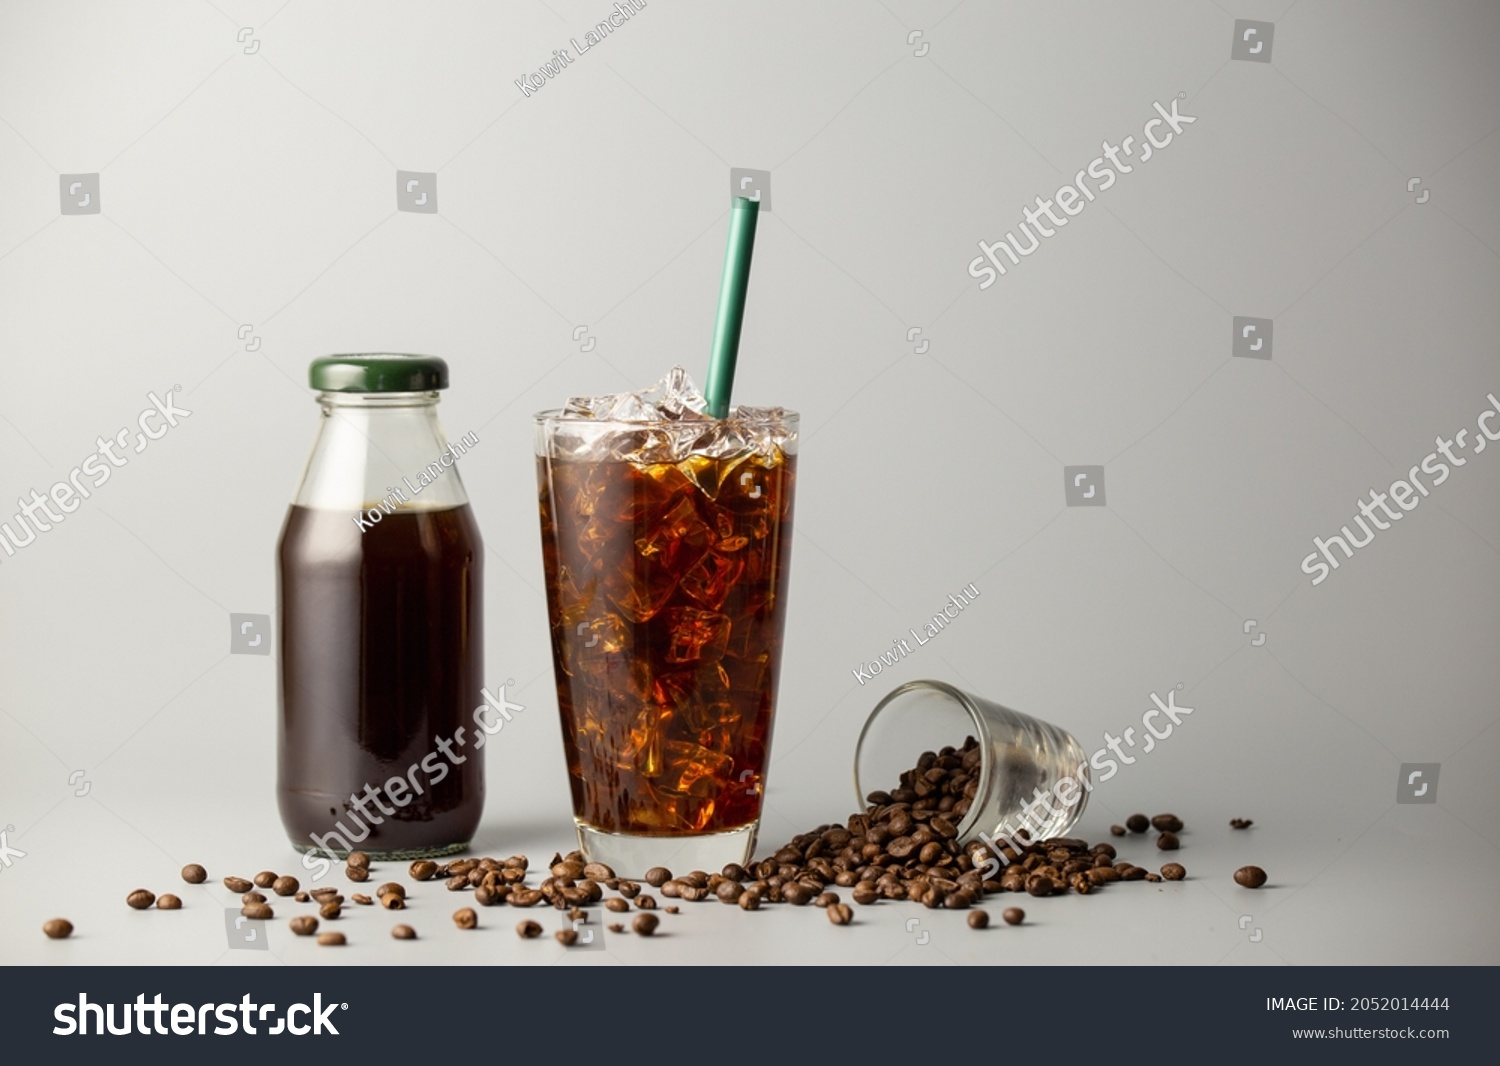 Iced americano coffee with coffee beans on grey background, Black coffee glass package for takeaway. Cold beverage product. #2052014444